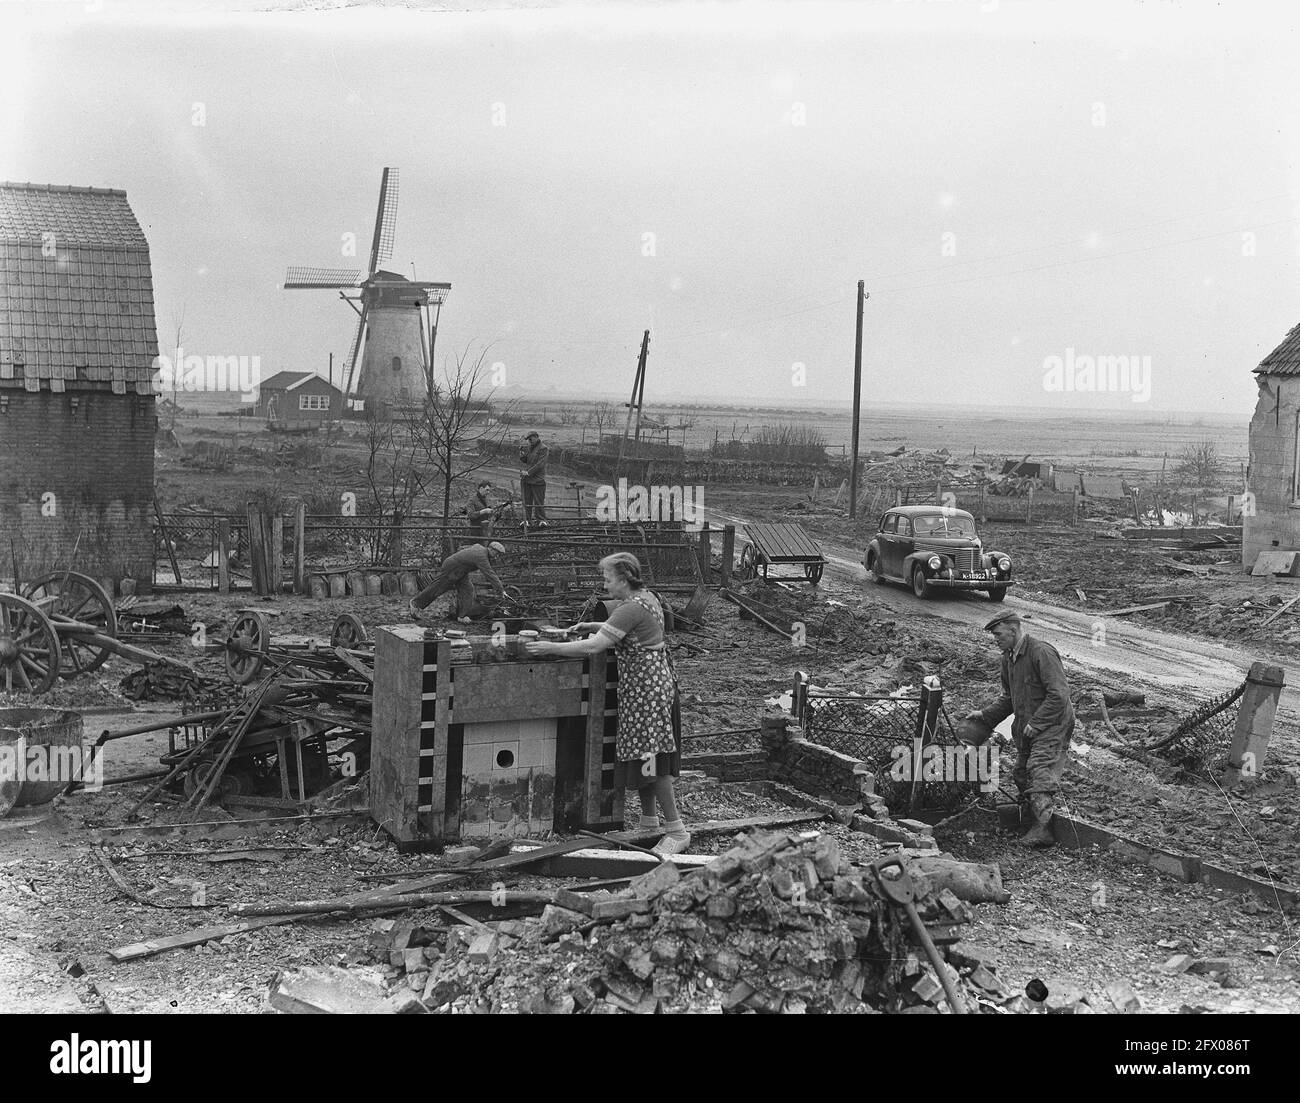 Schouwen Duiveland still sad. Nieuwerkerk, March 25, 1954, repairs, flood, The Netherlands, 20th century press agency photo, news to remember, documentary, historic photography 1945-1990, visual stories, human history of the Twentieth Century, capturing moments in time Stock Photo